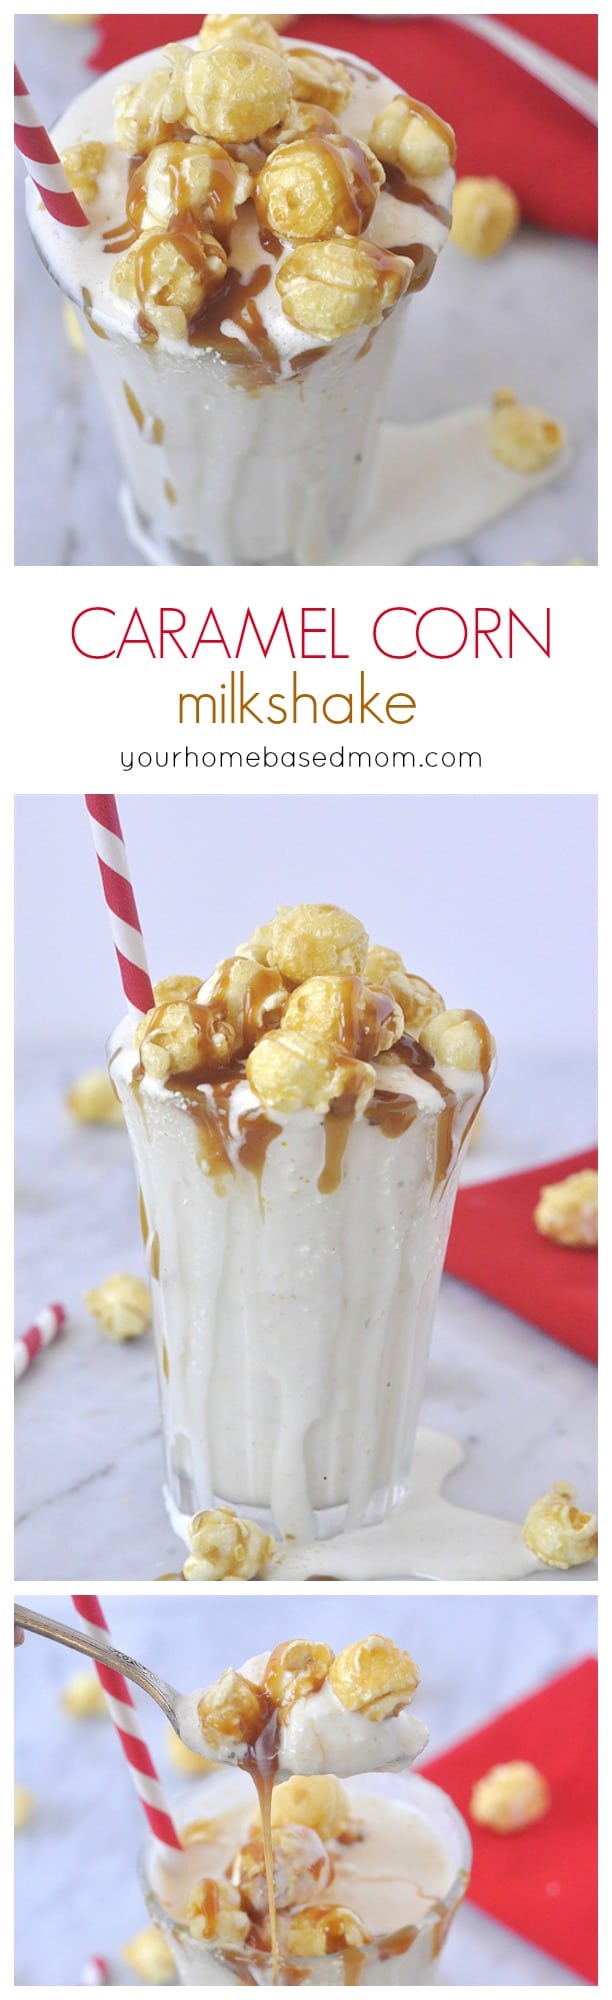 Caramel Corn Milkshake - who would have thought!  So delicious  @yourhomebasedmom.com